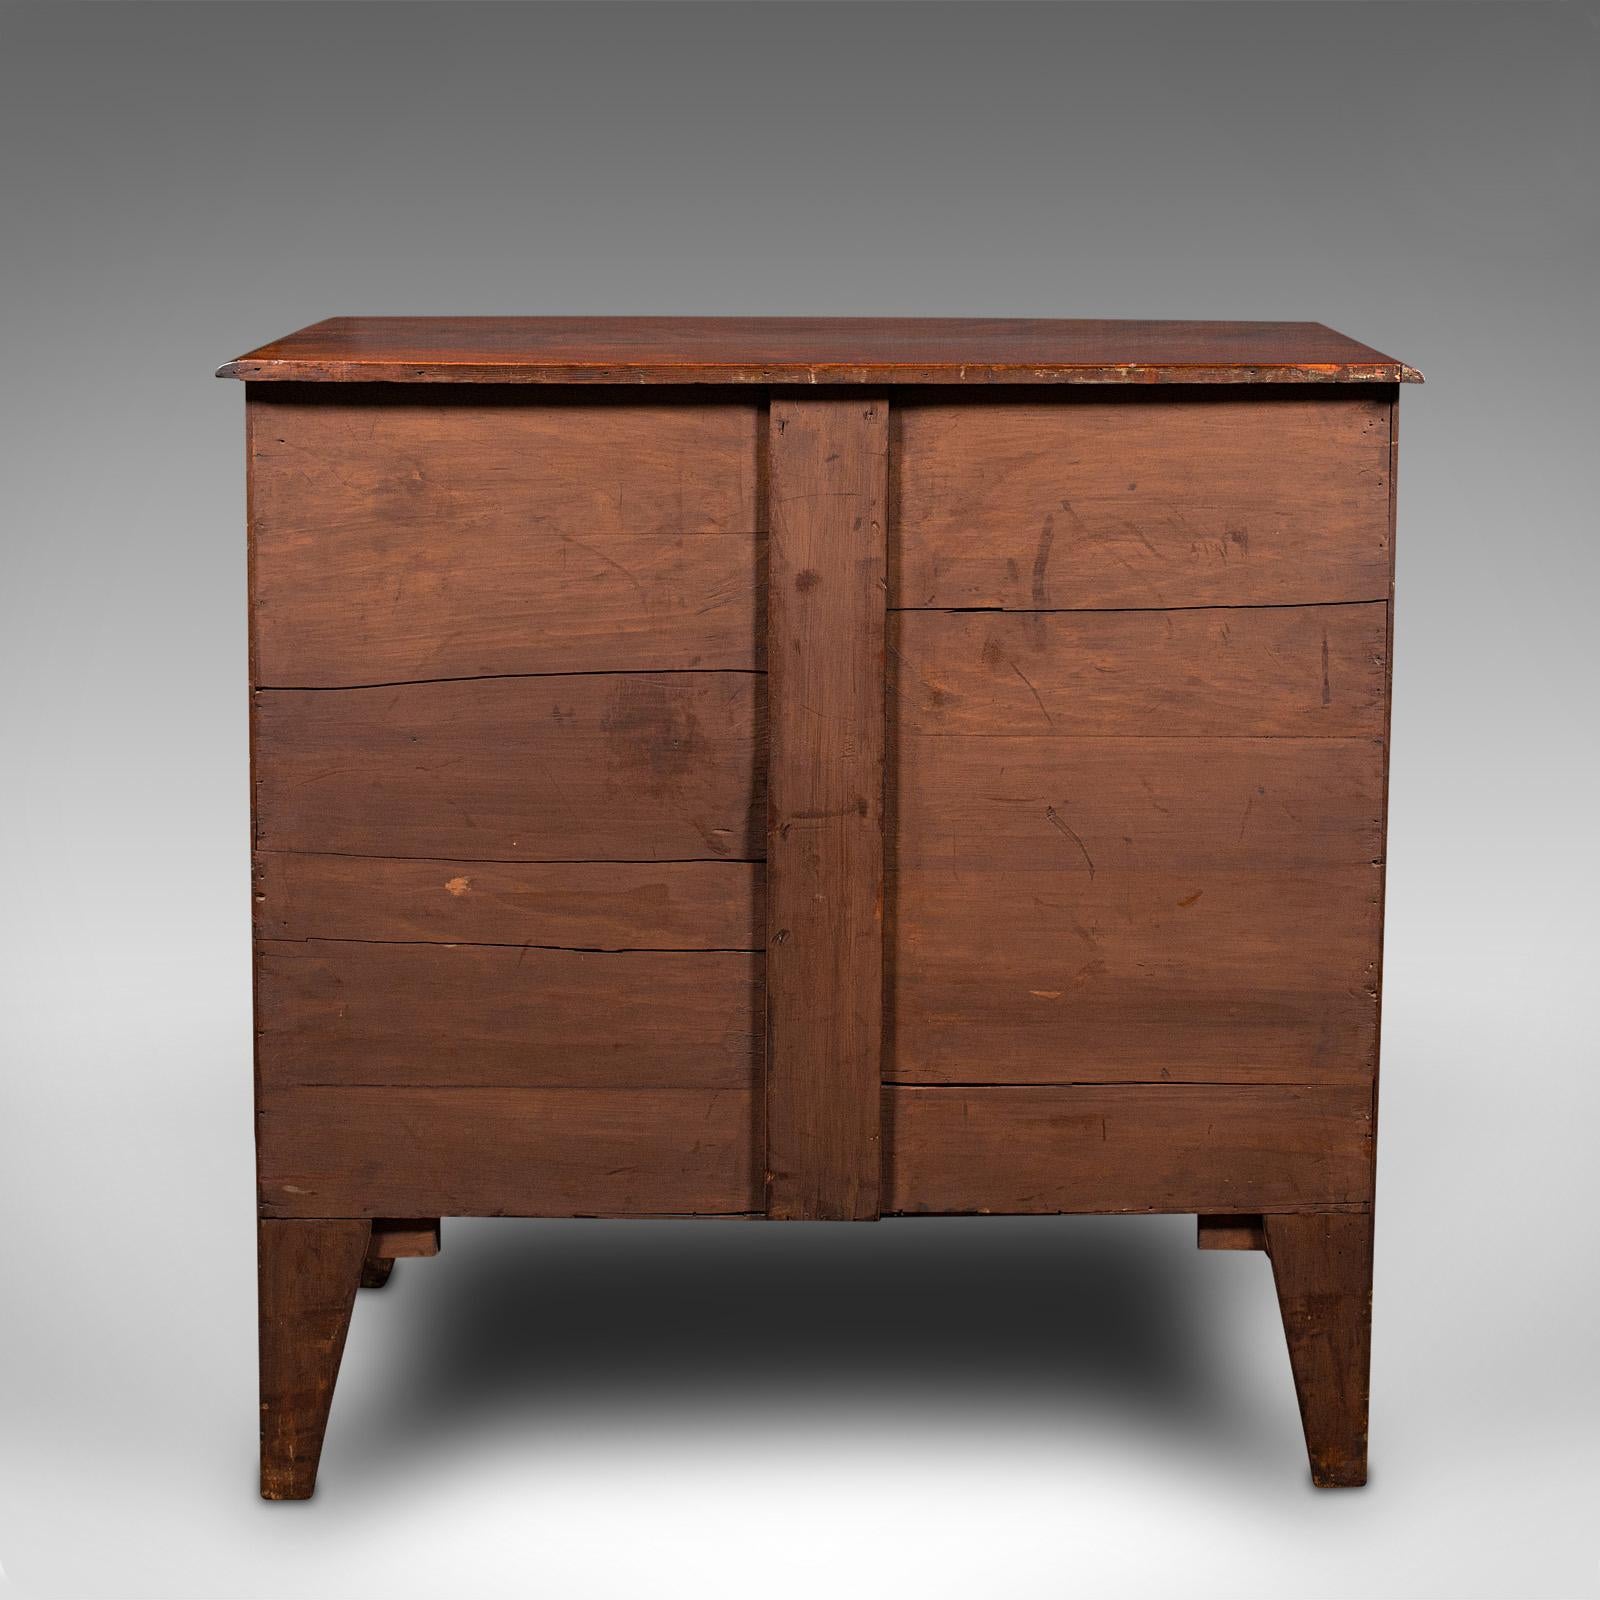 18th Century Grand Antique Bow Front Chest of Drawers, English, Tallboy, Georgian, Circa 1780